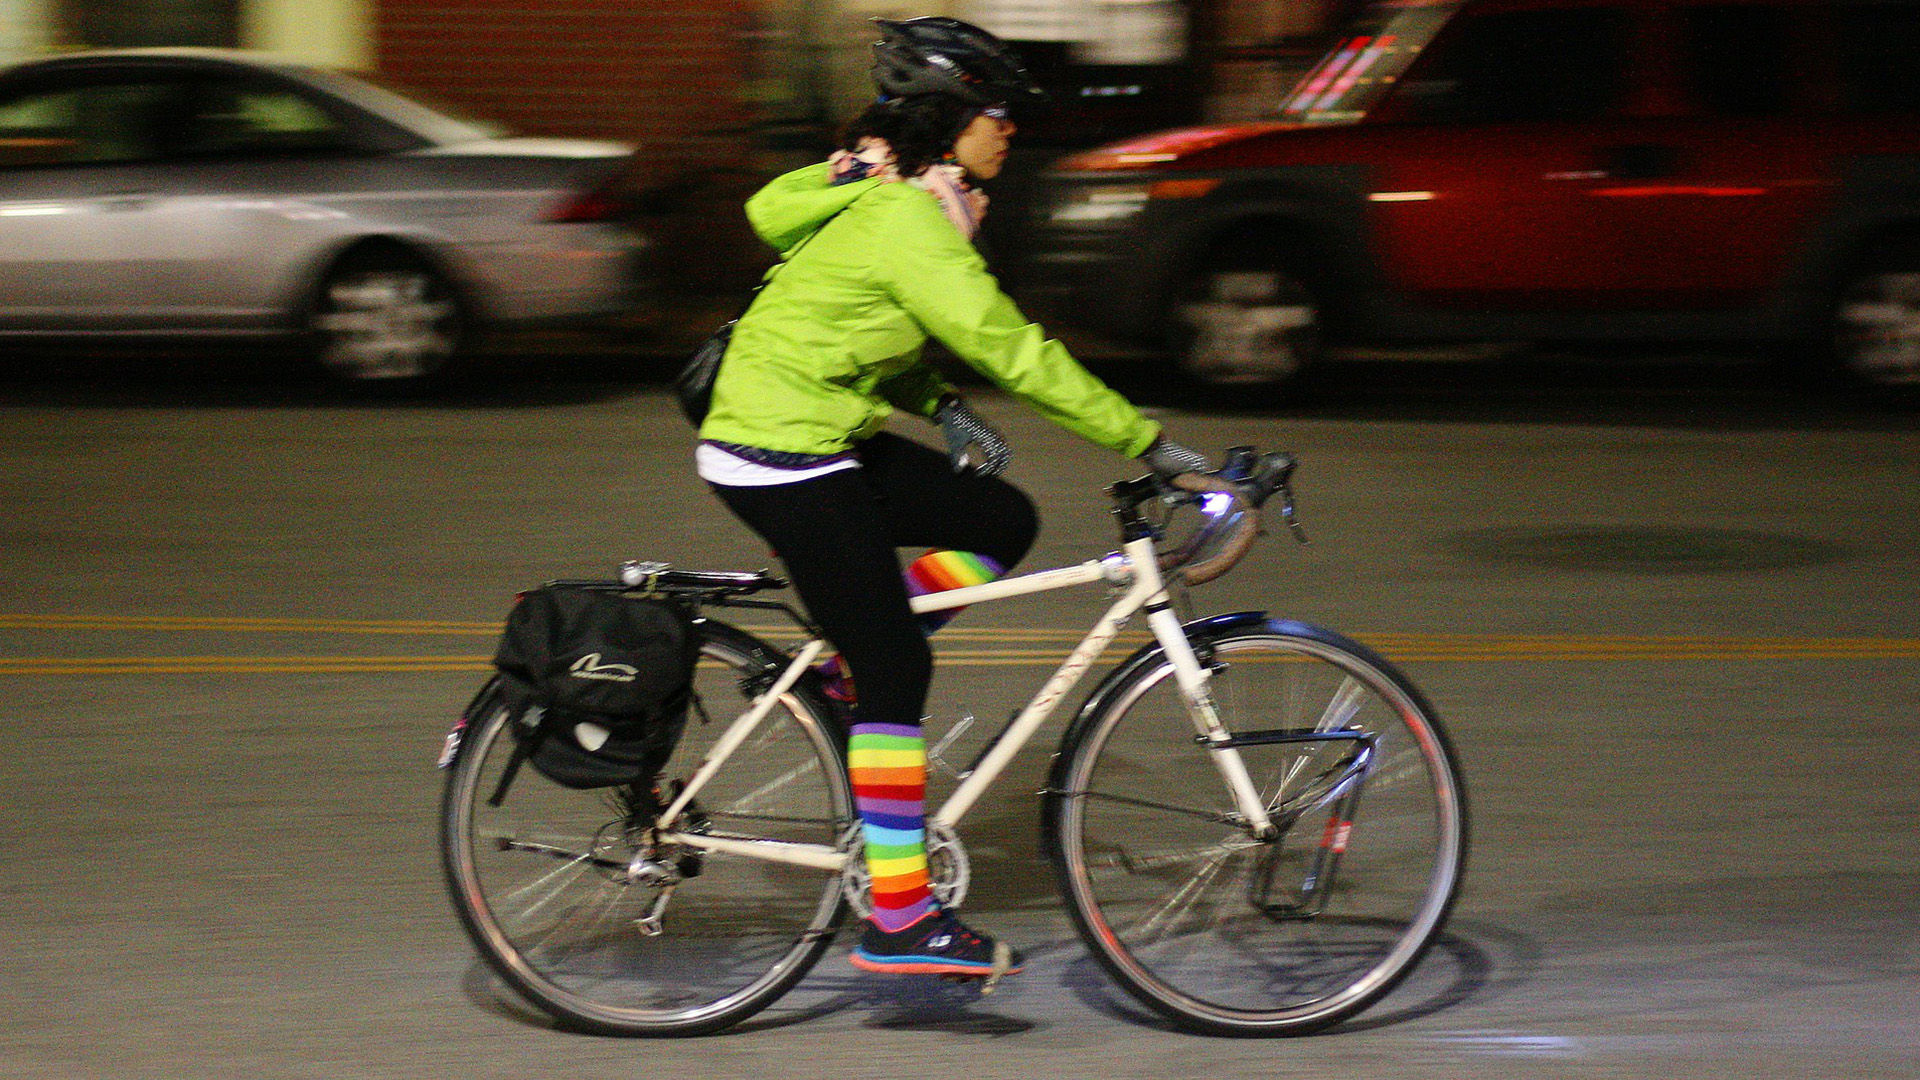 Person riding a bicycle at night, dressed in a high-visibility long-sleeved jacket and rainbow-striped socks. Image by Richard Masoner / Cyclelicious (Creative Commons CC BY-SA 2.0 DEED) - https://flic.kr/p/qHkNvC